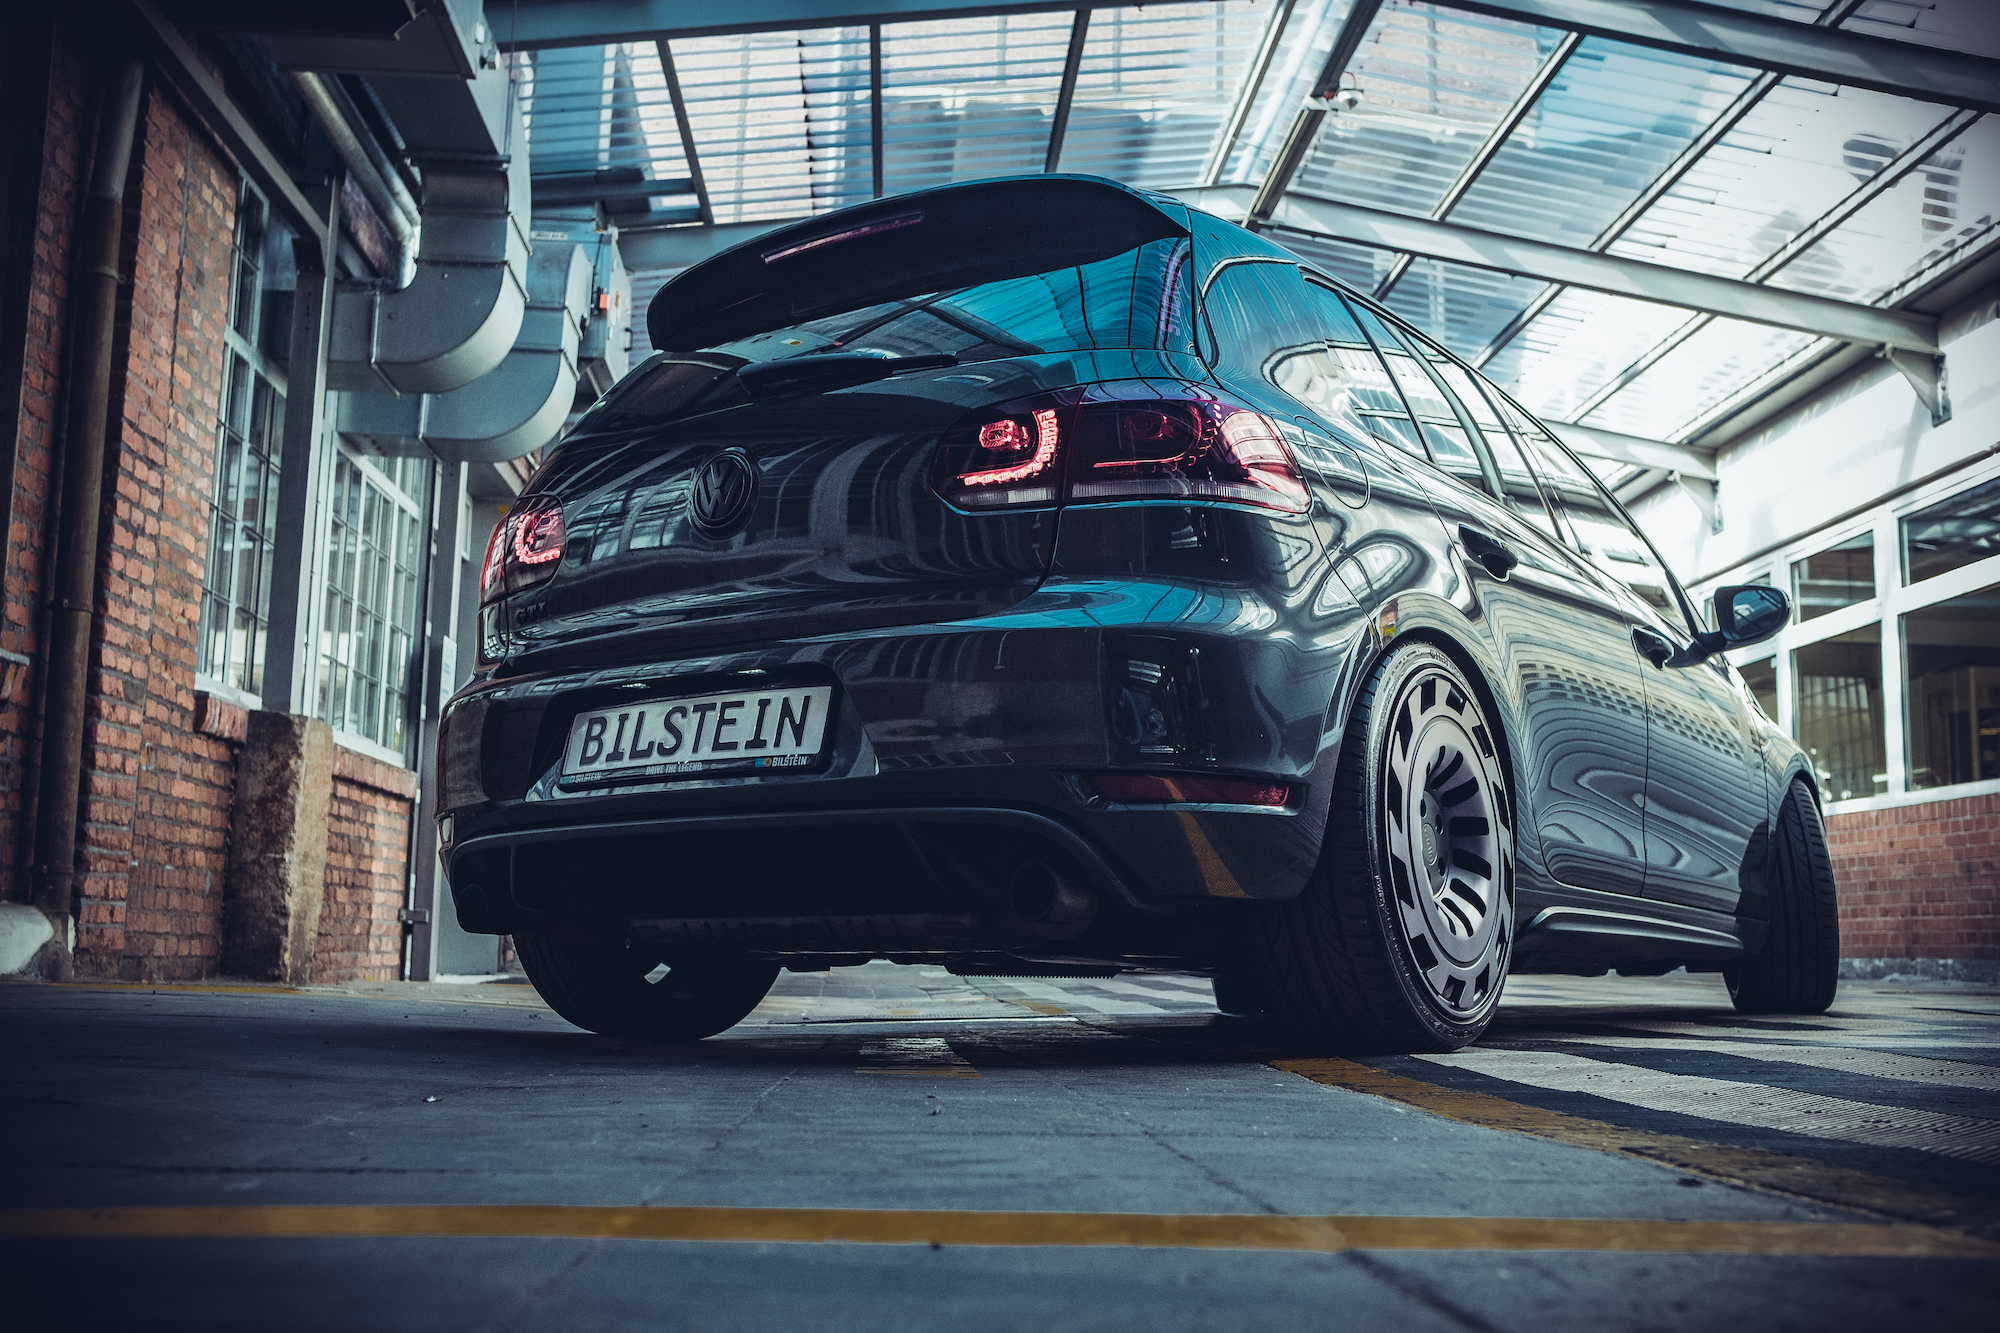 VW Golf: Your Tuning Guide